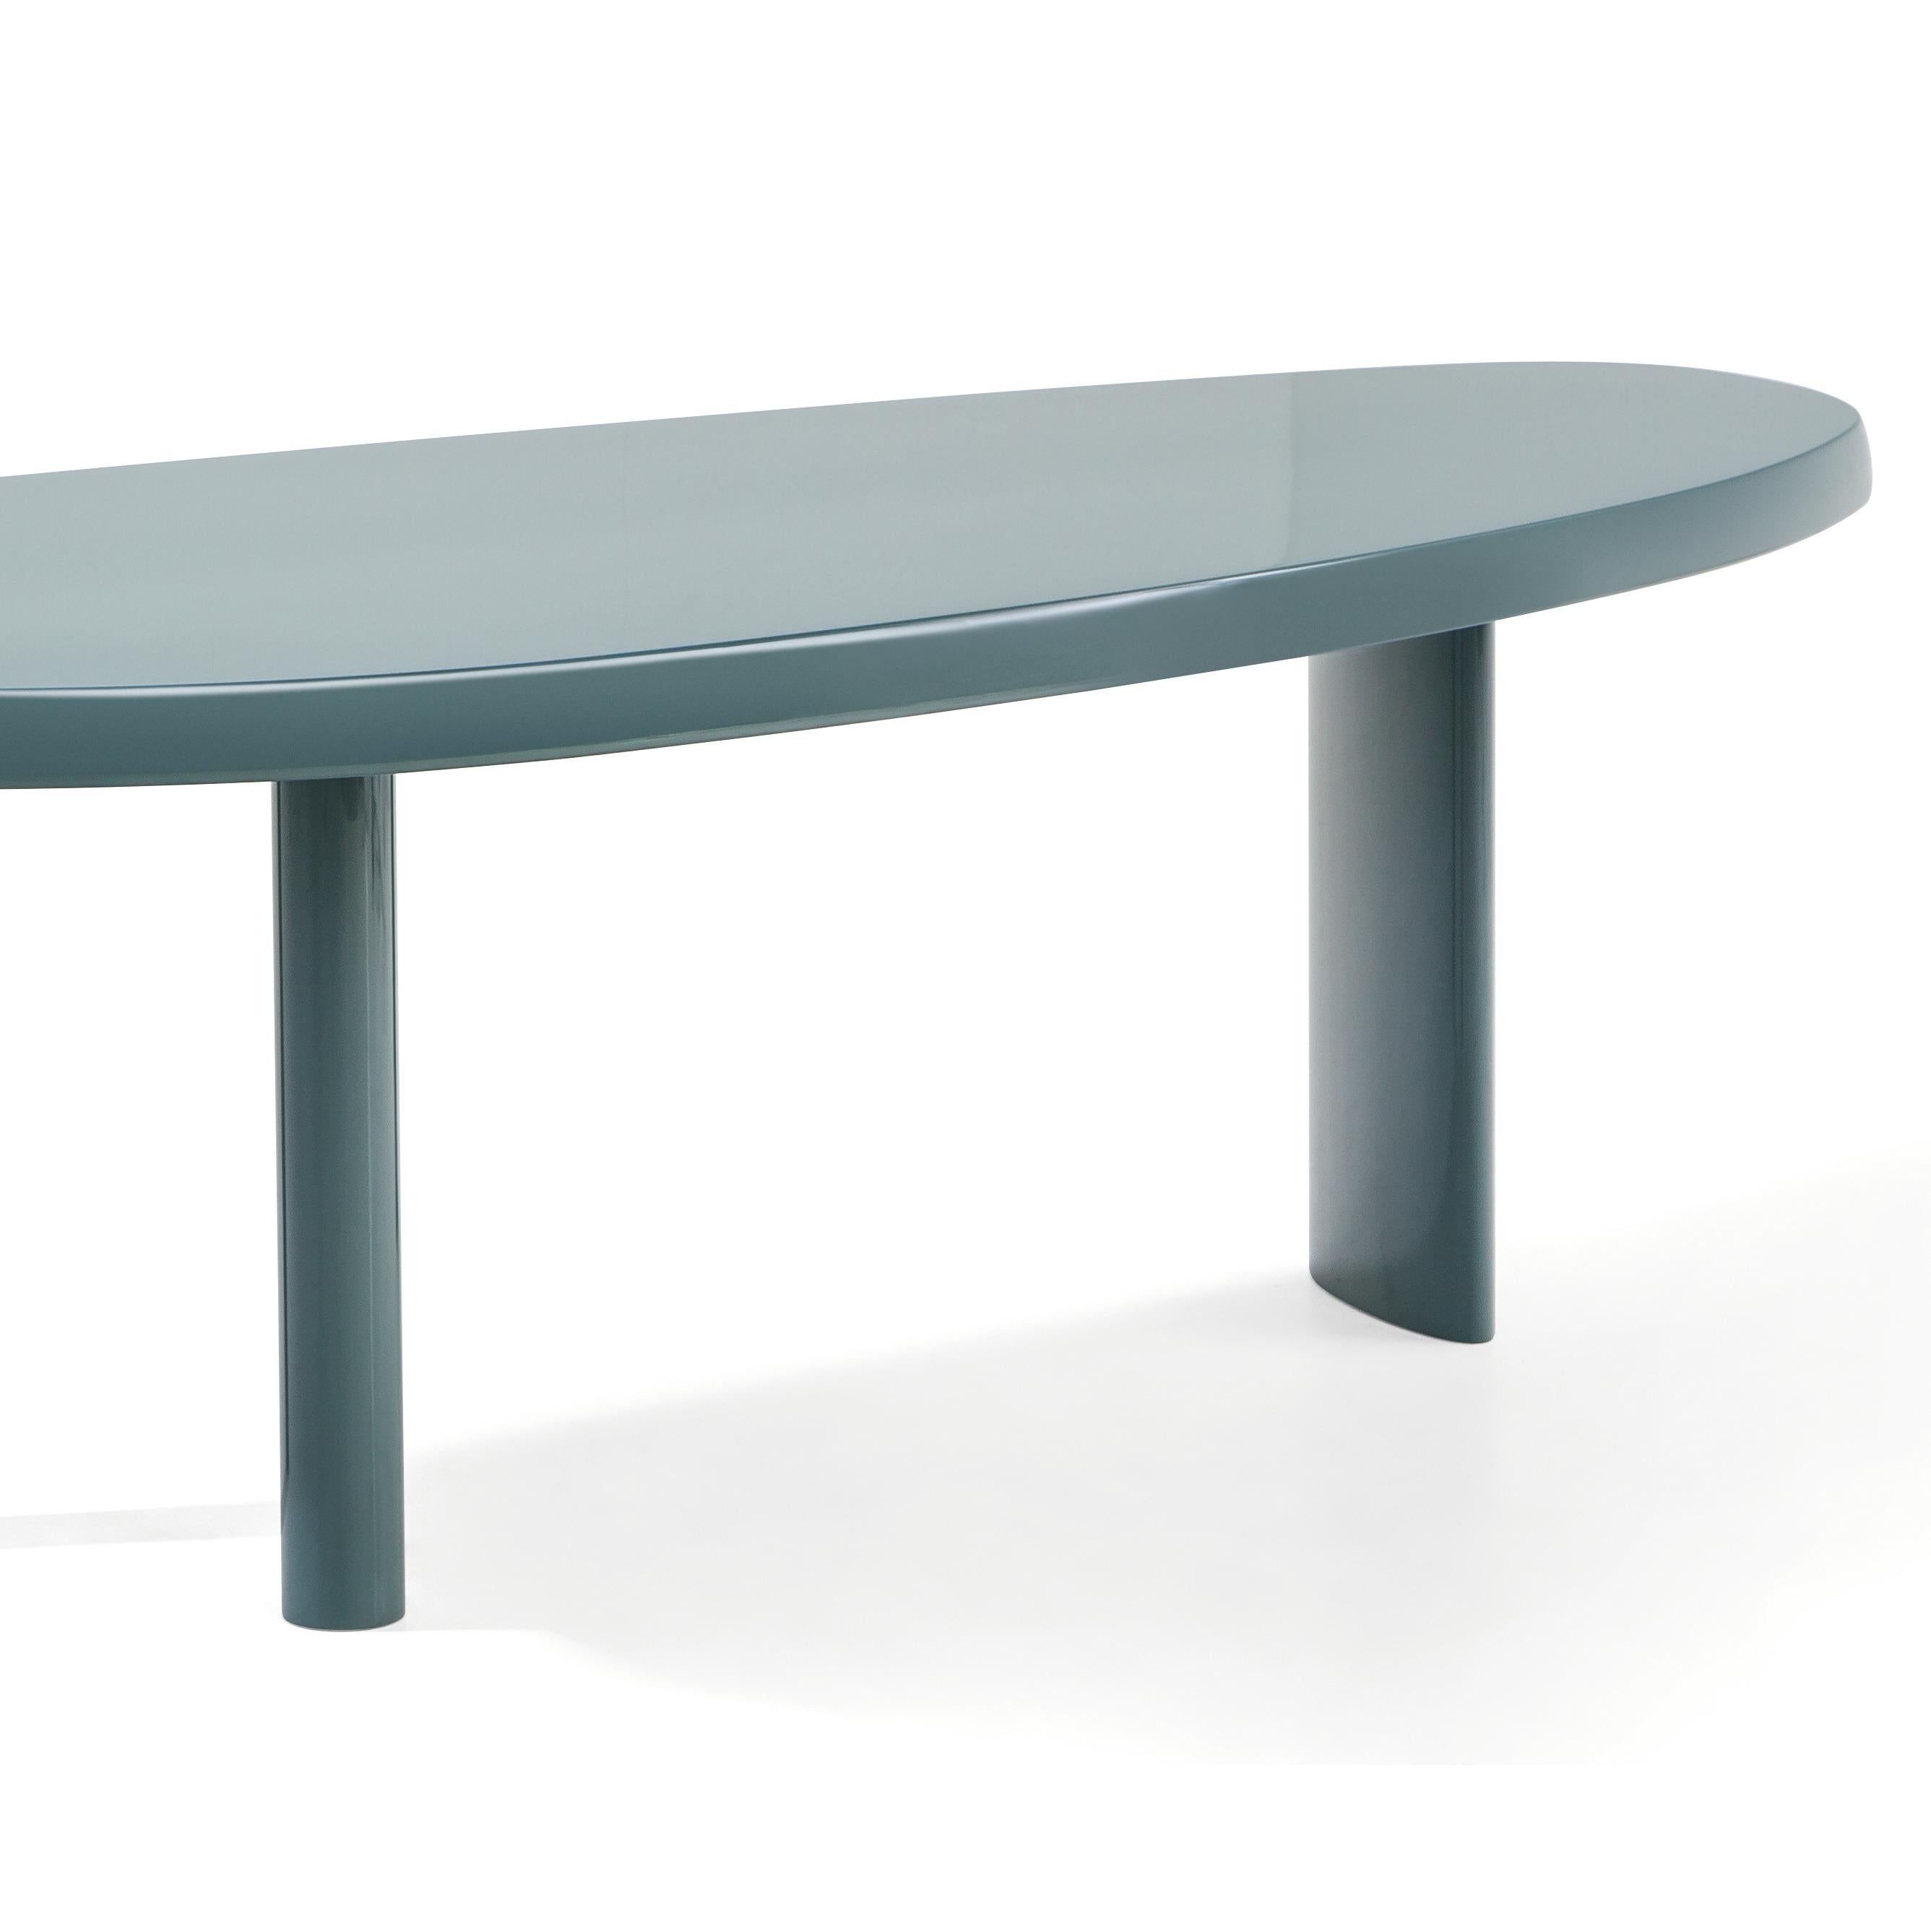 Sage green Forme Libre table designed by Charlotte Perriand in 1959. Relaunched by Cassina in 2011.
Manufactured by Cassina in Italy.

Charlotte Perriand started work on the tables en forme libre in 1938. Originally intended for her own atelier in